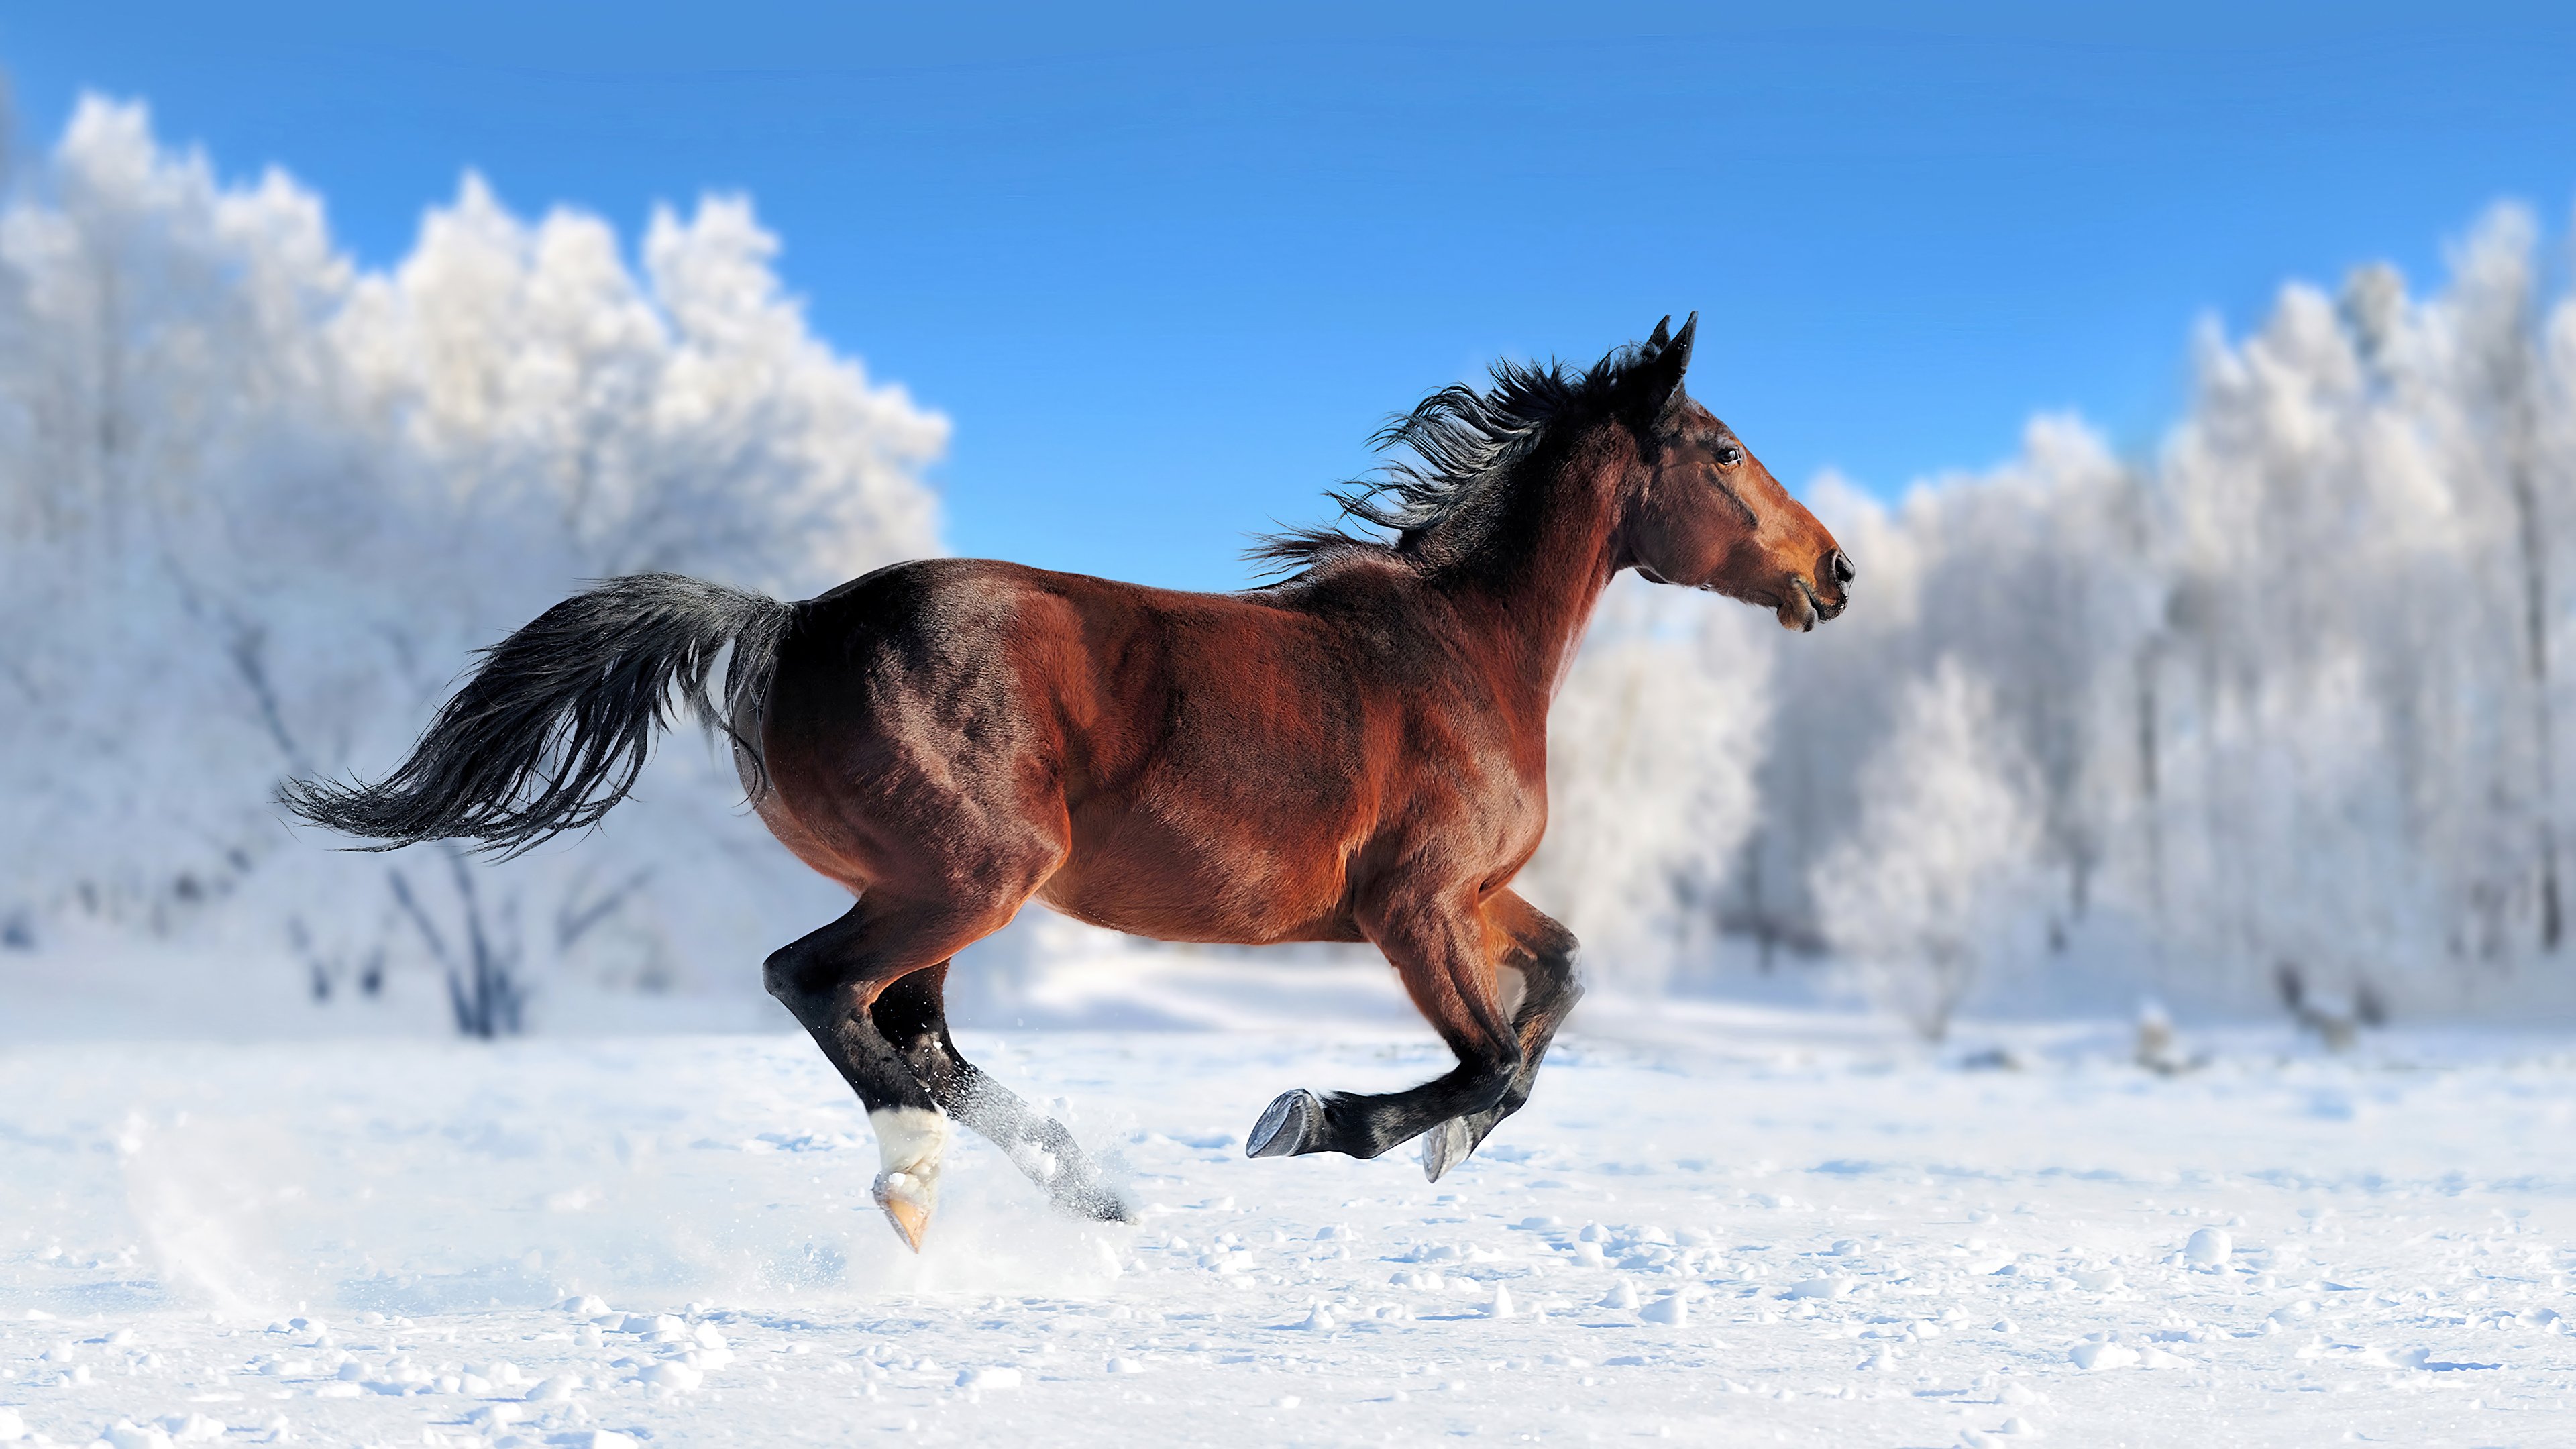 Wallpaper Horse running in the snow